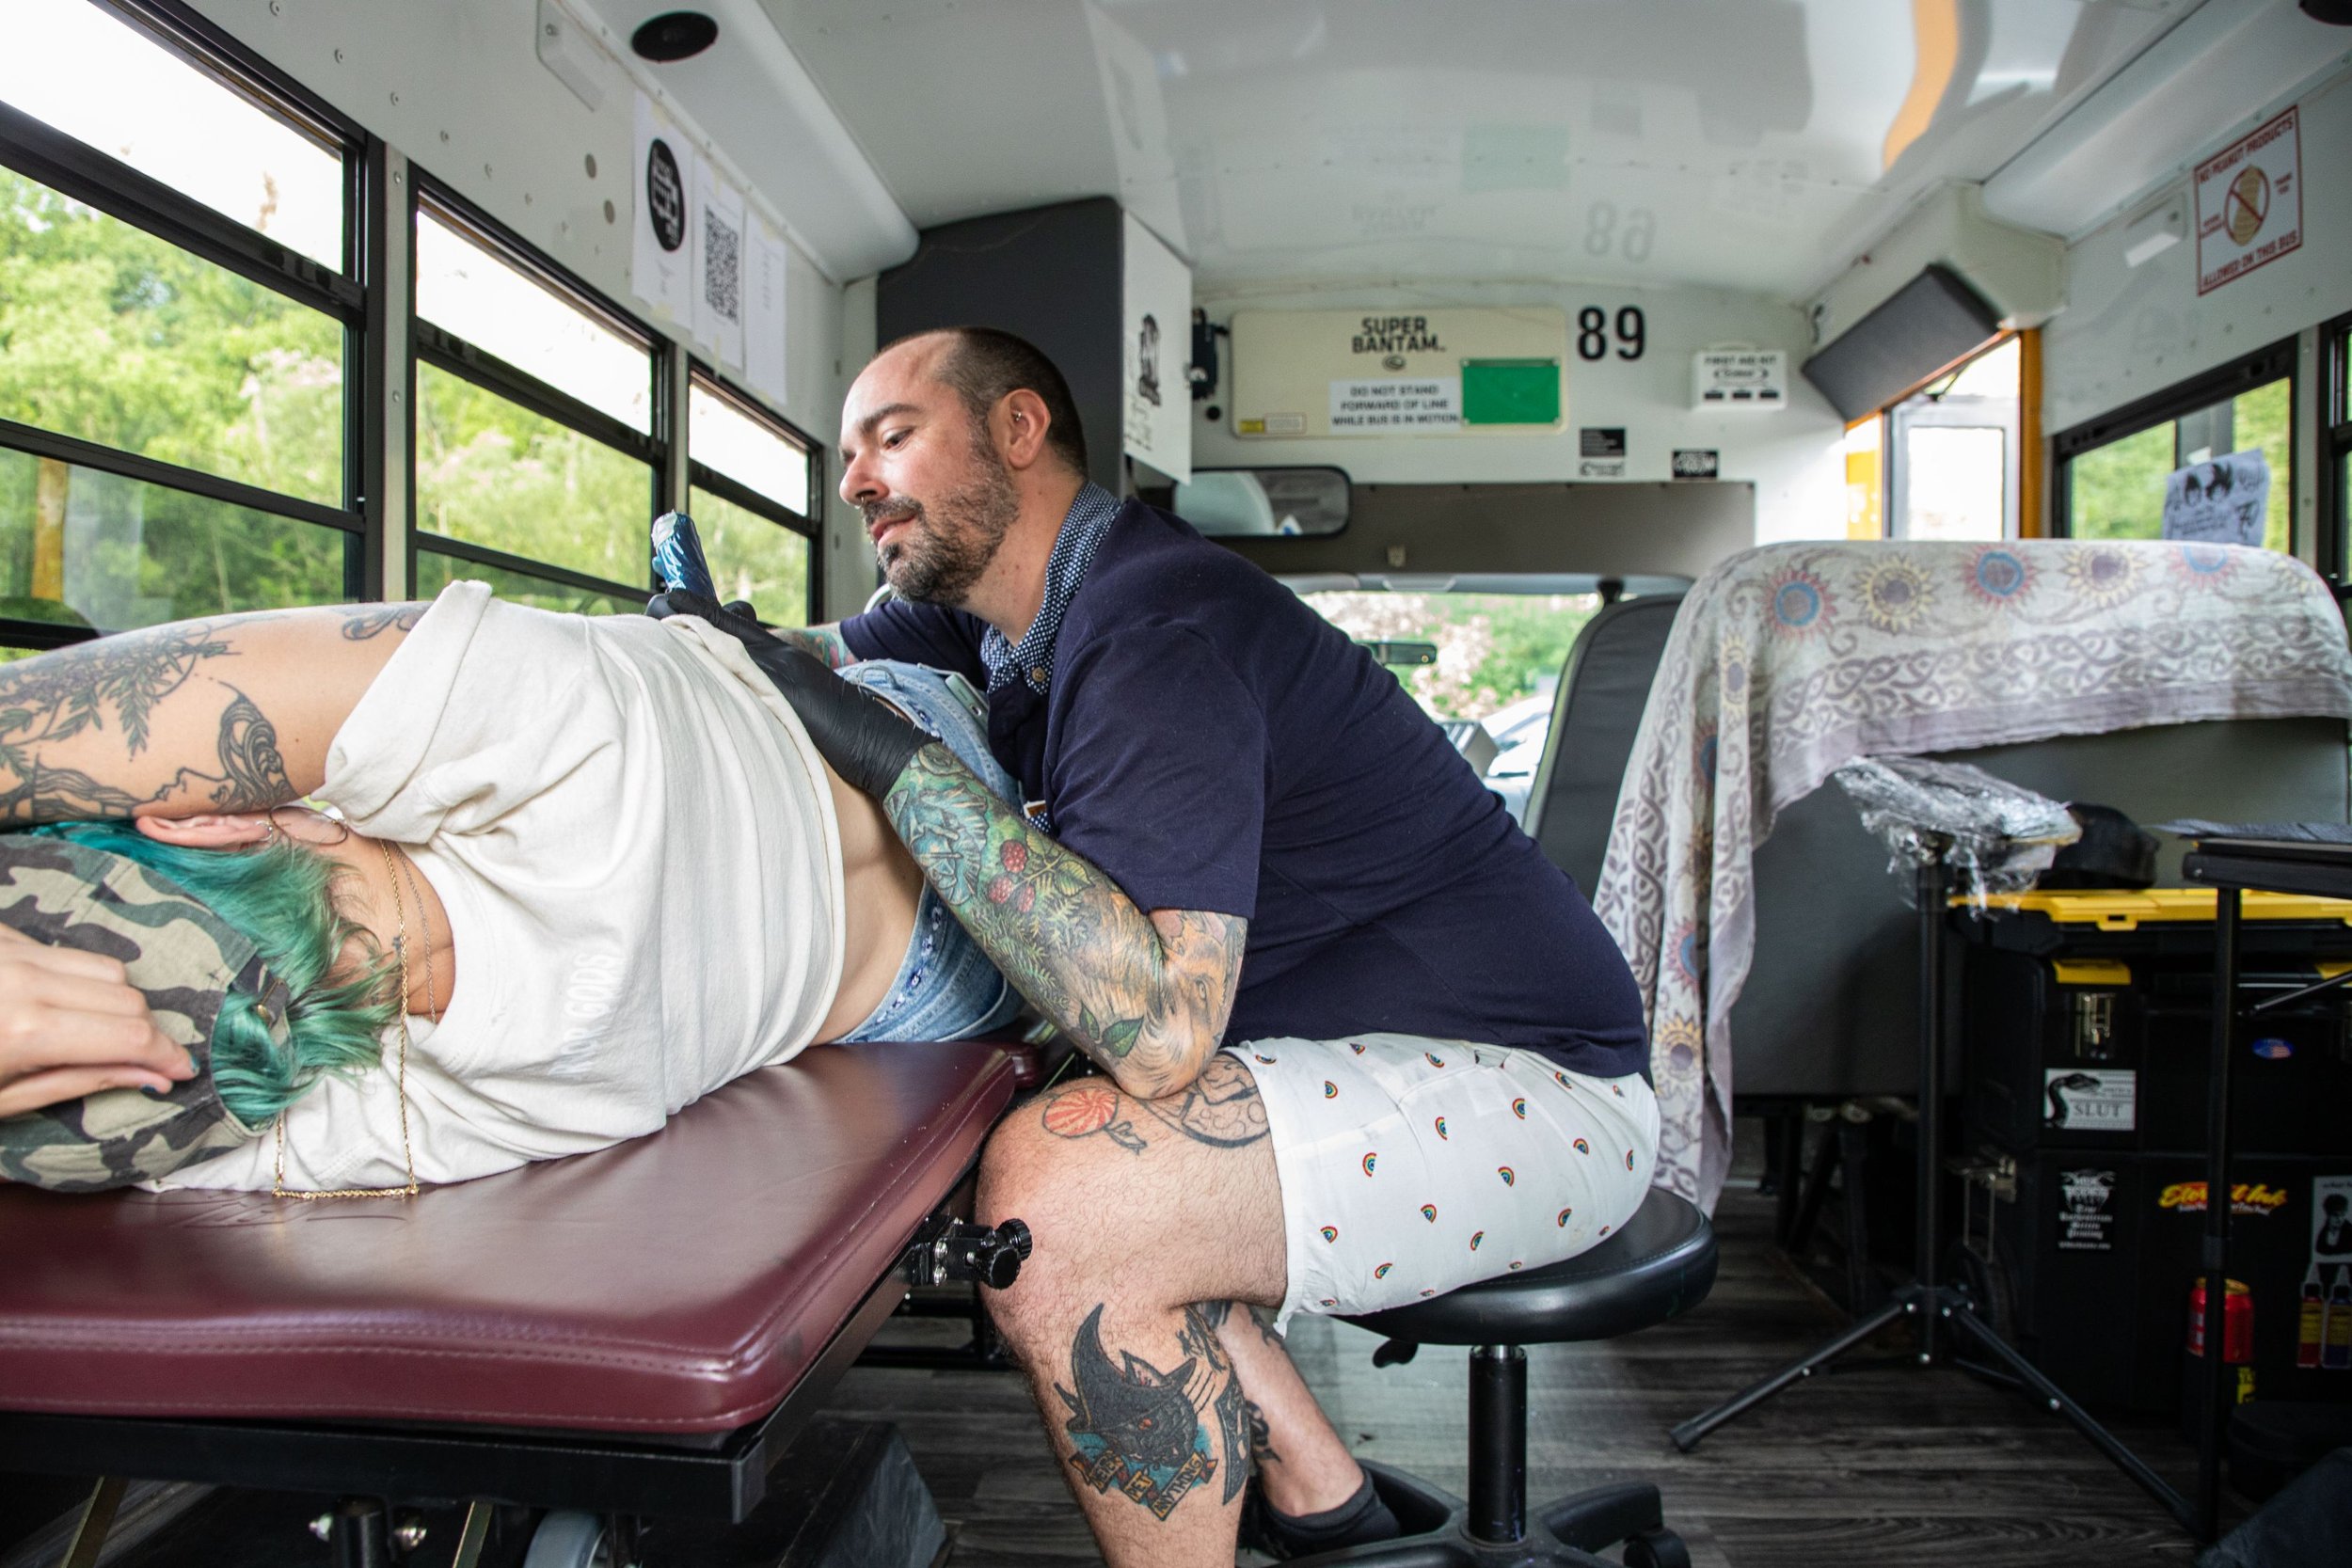 bus' in Tattoos • Search in +1.3M Tattoos Now • Tattoodo